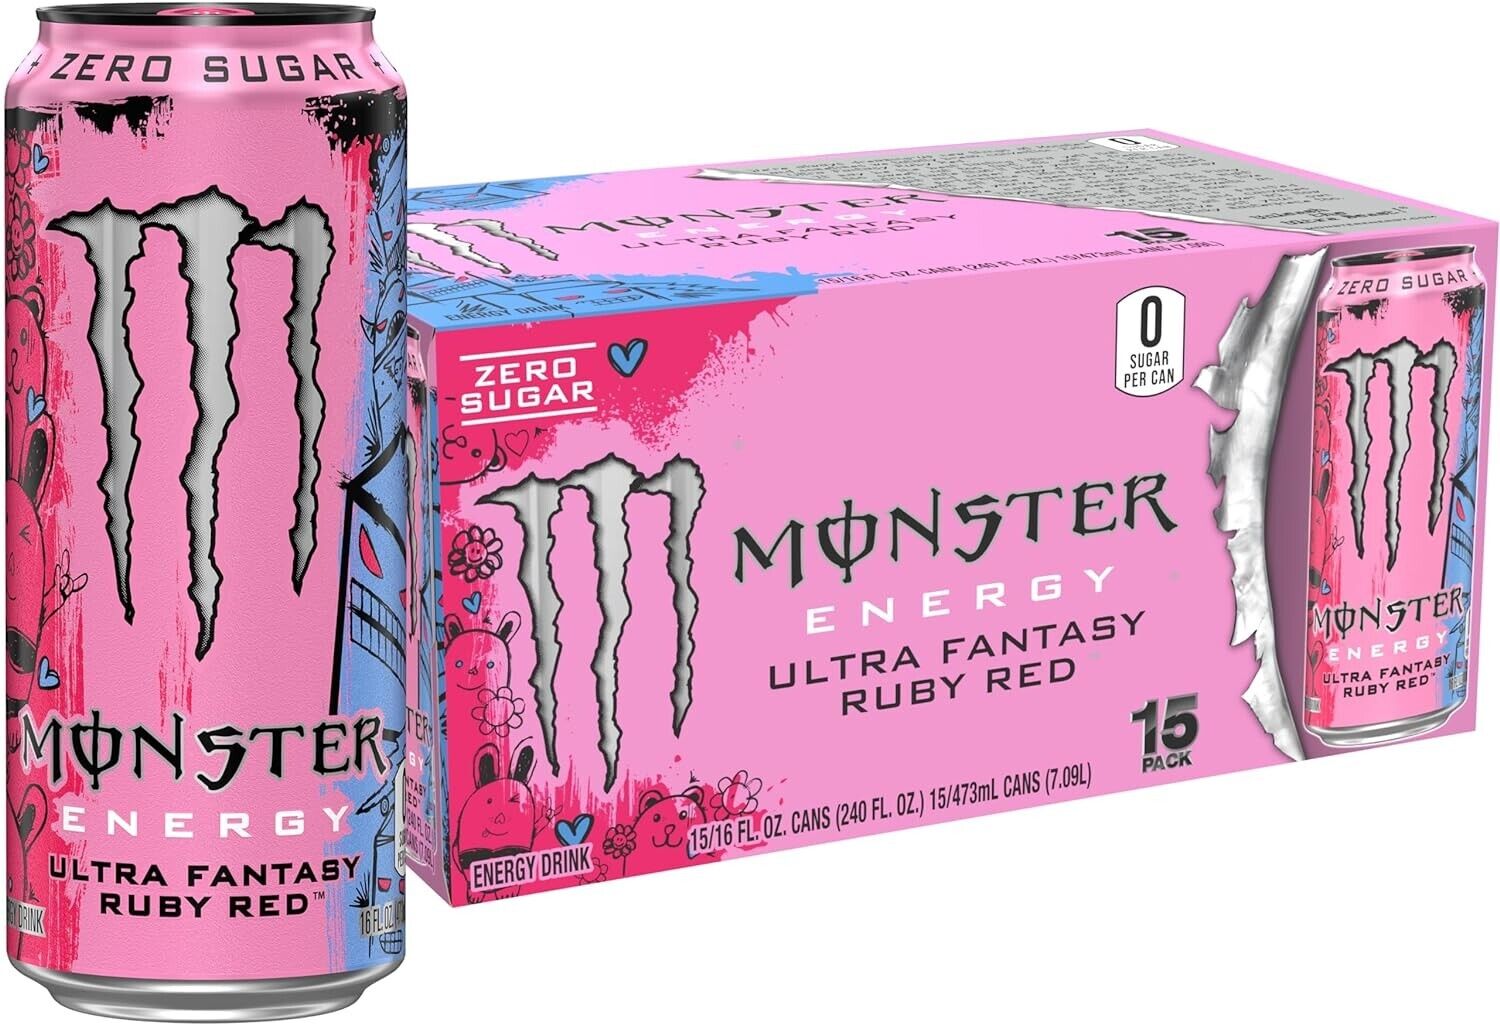 Monster Energy Ultra Fantasy Ruby Red, Sugar Free Energy Drink, 16 Ounce ( pack